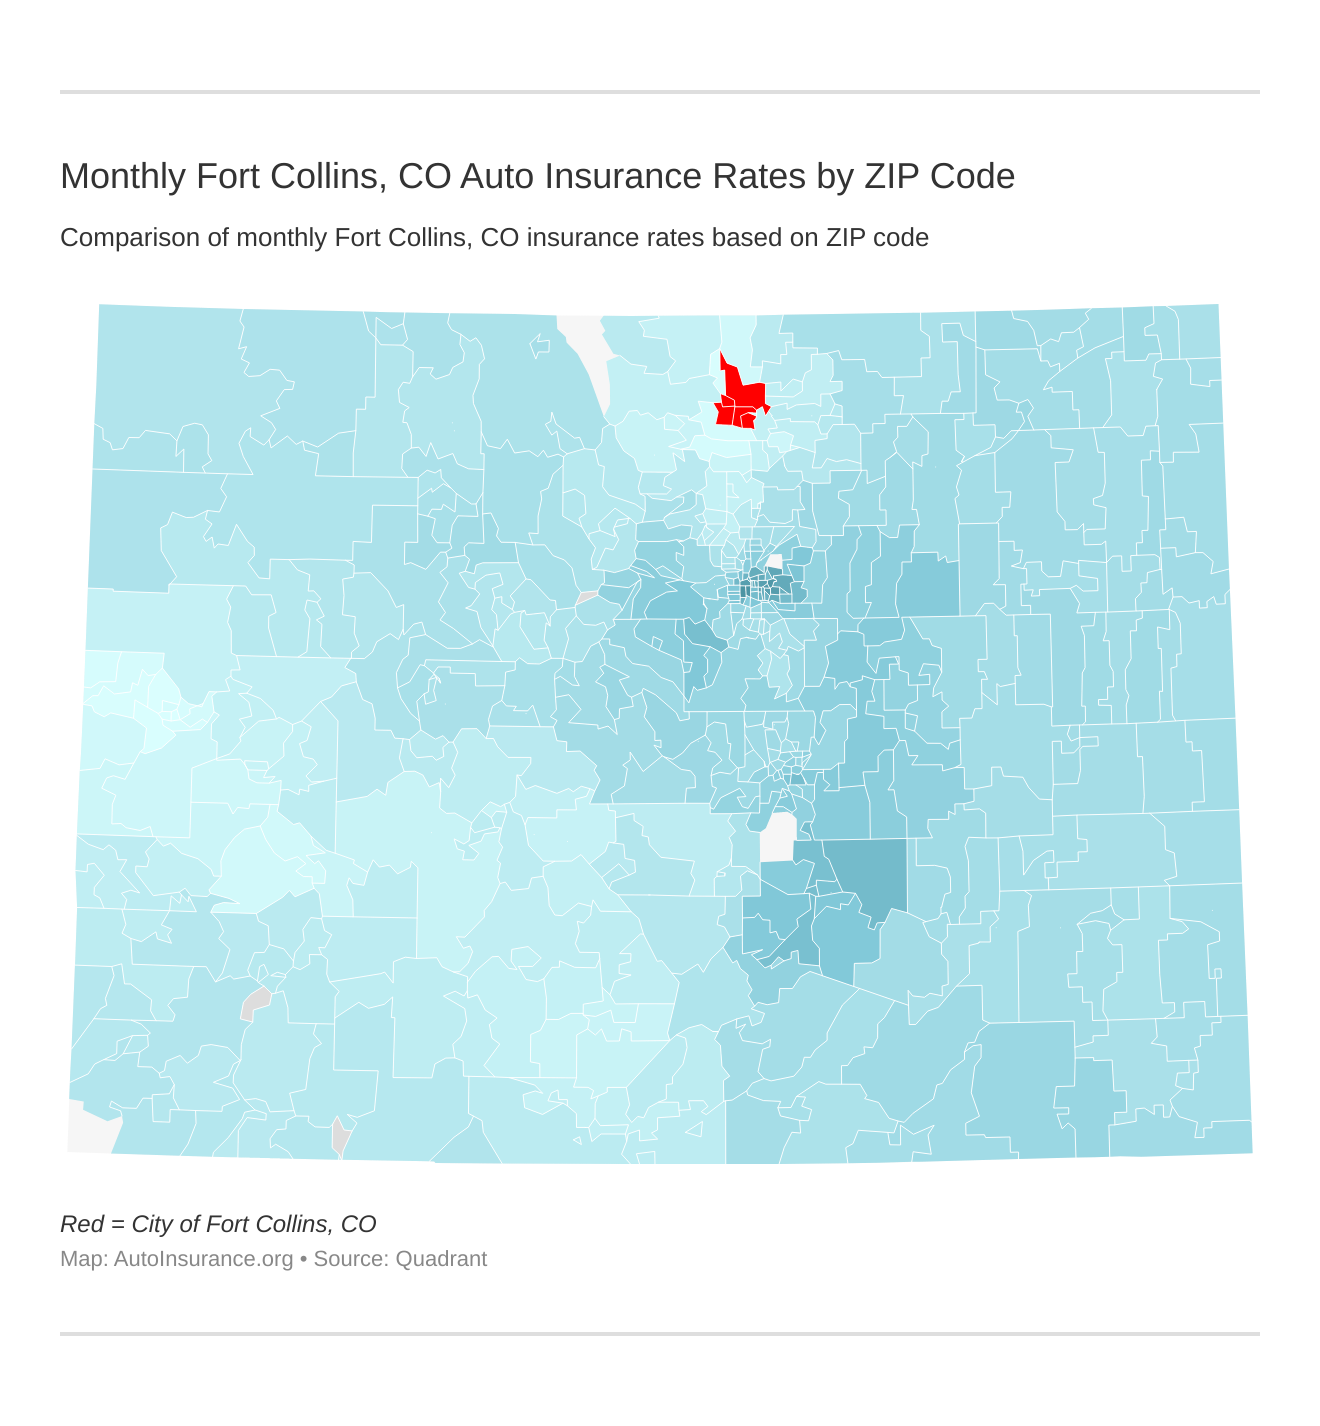 Monthly Fort Collins, CO Auto Insurance Rates by ZIP Code